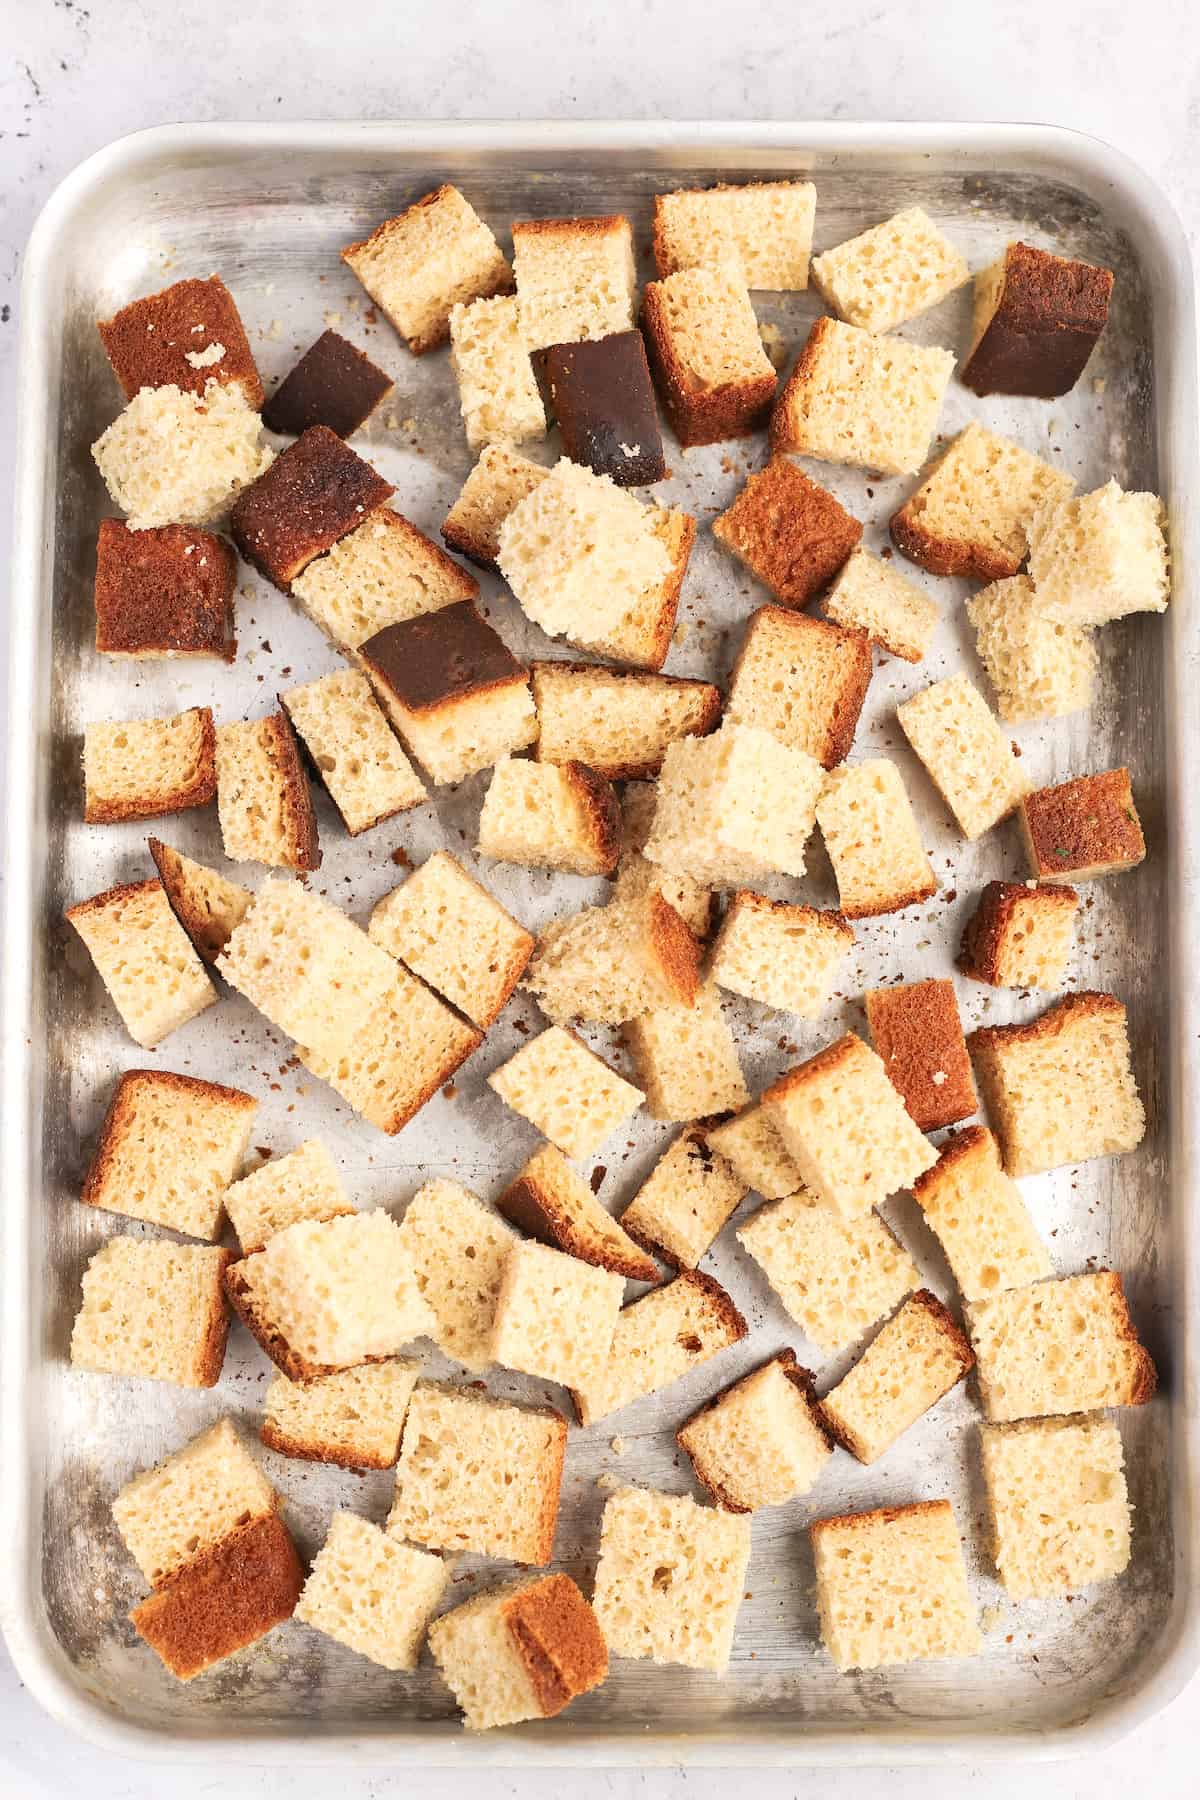 uncooked bread cubes on a baking sheet